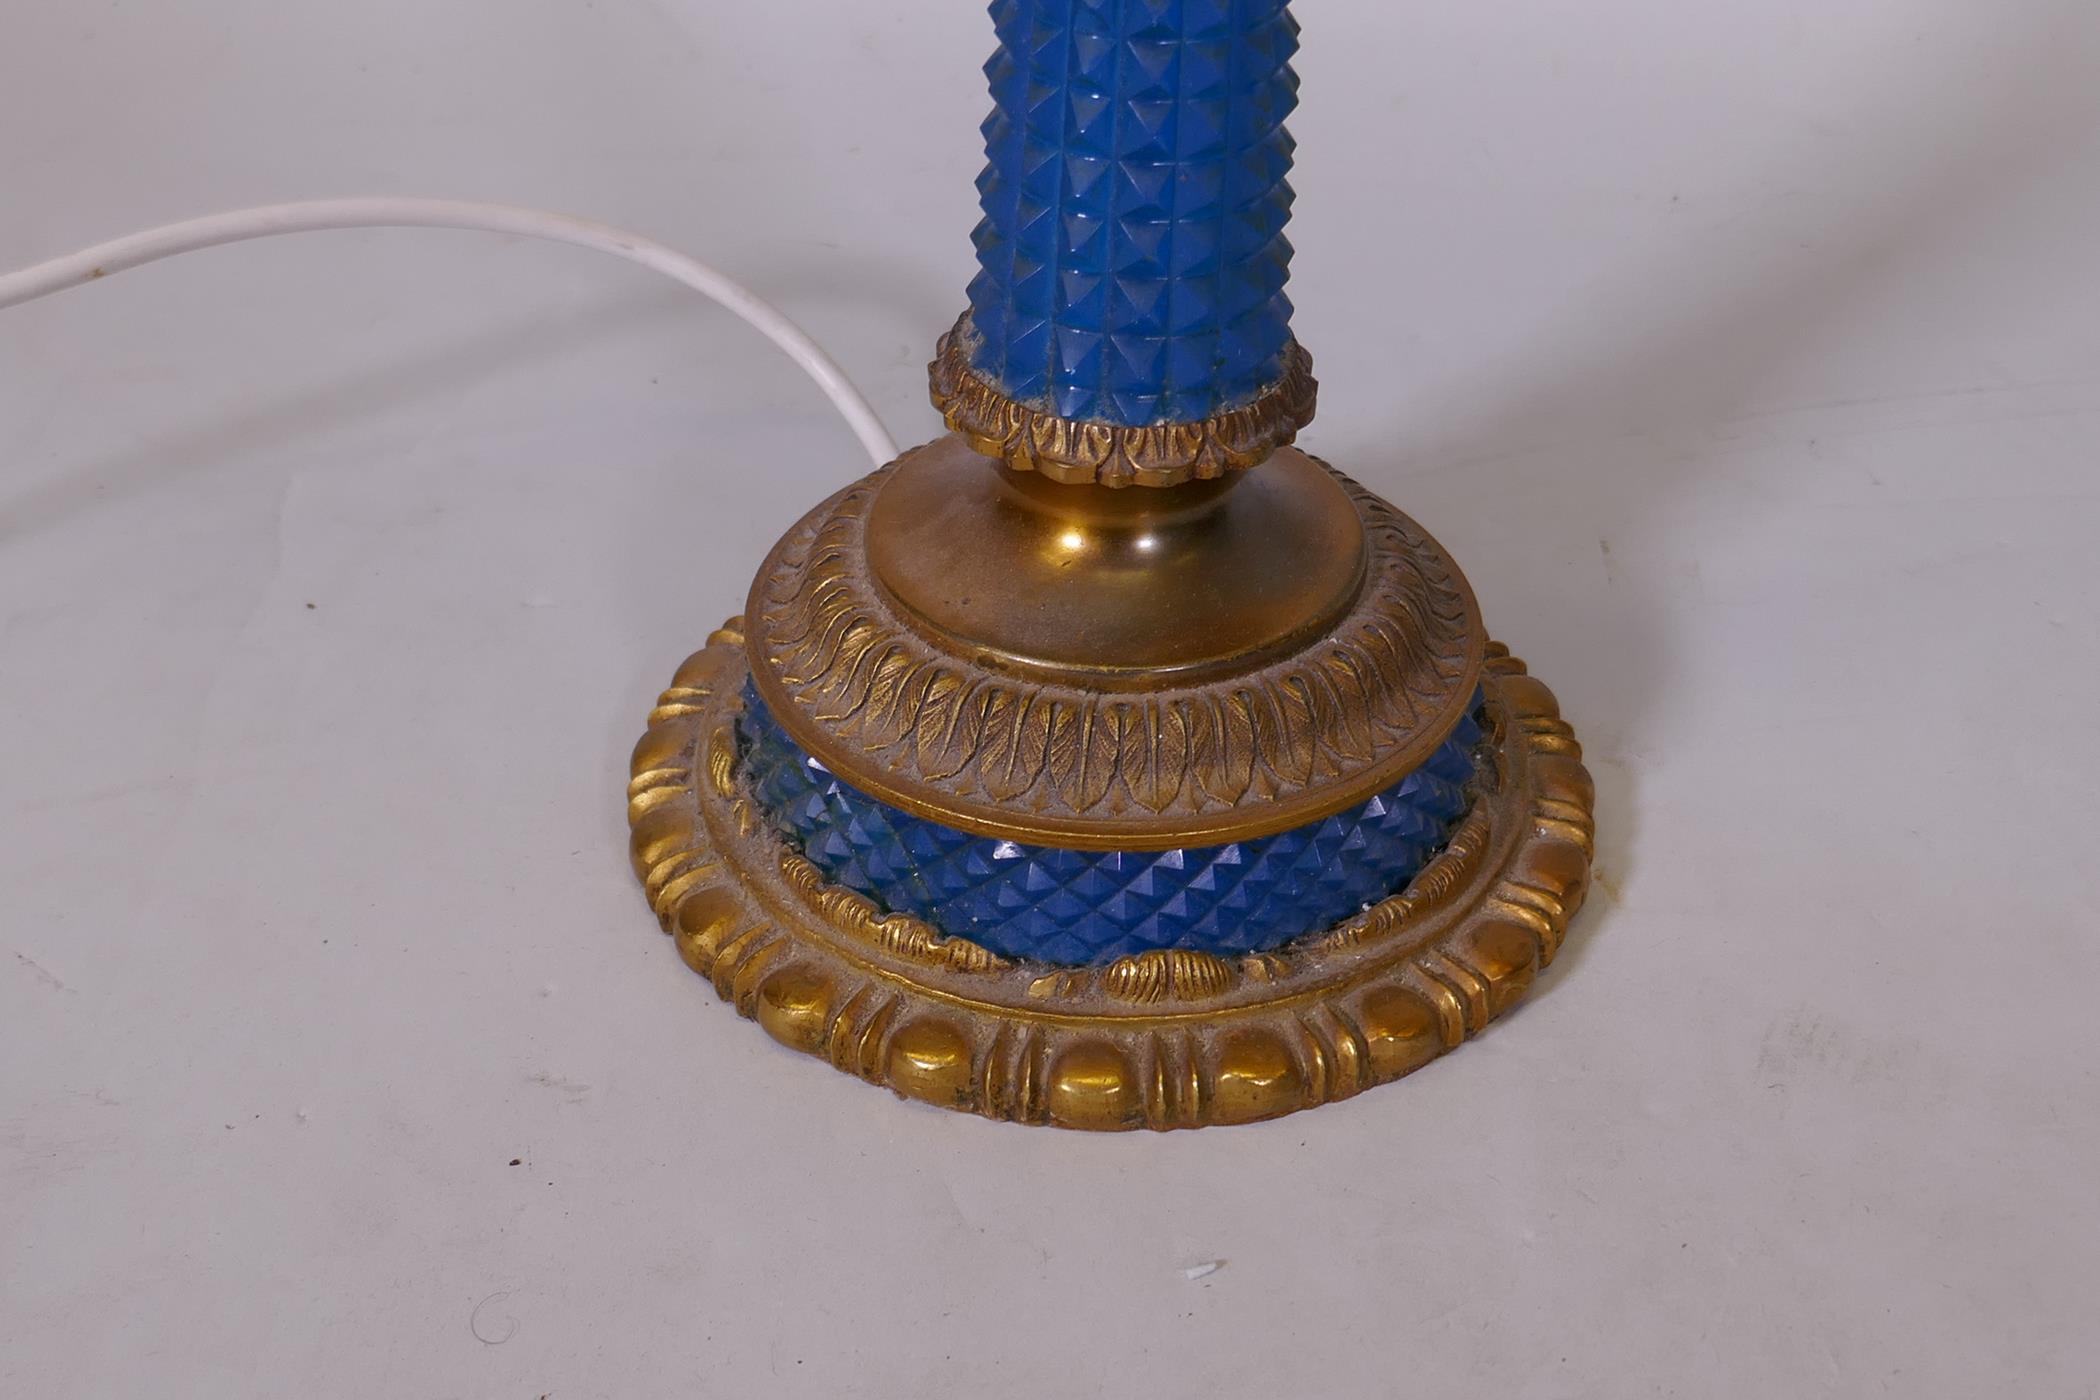 A pair of blue glass and brass mounted lustre table lamps, lacking a shade and seven drops, 26" high - Image 3 of 3